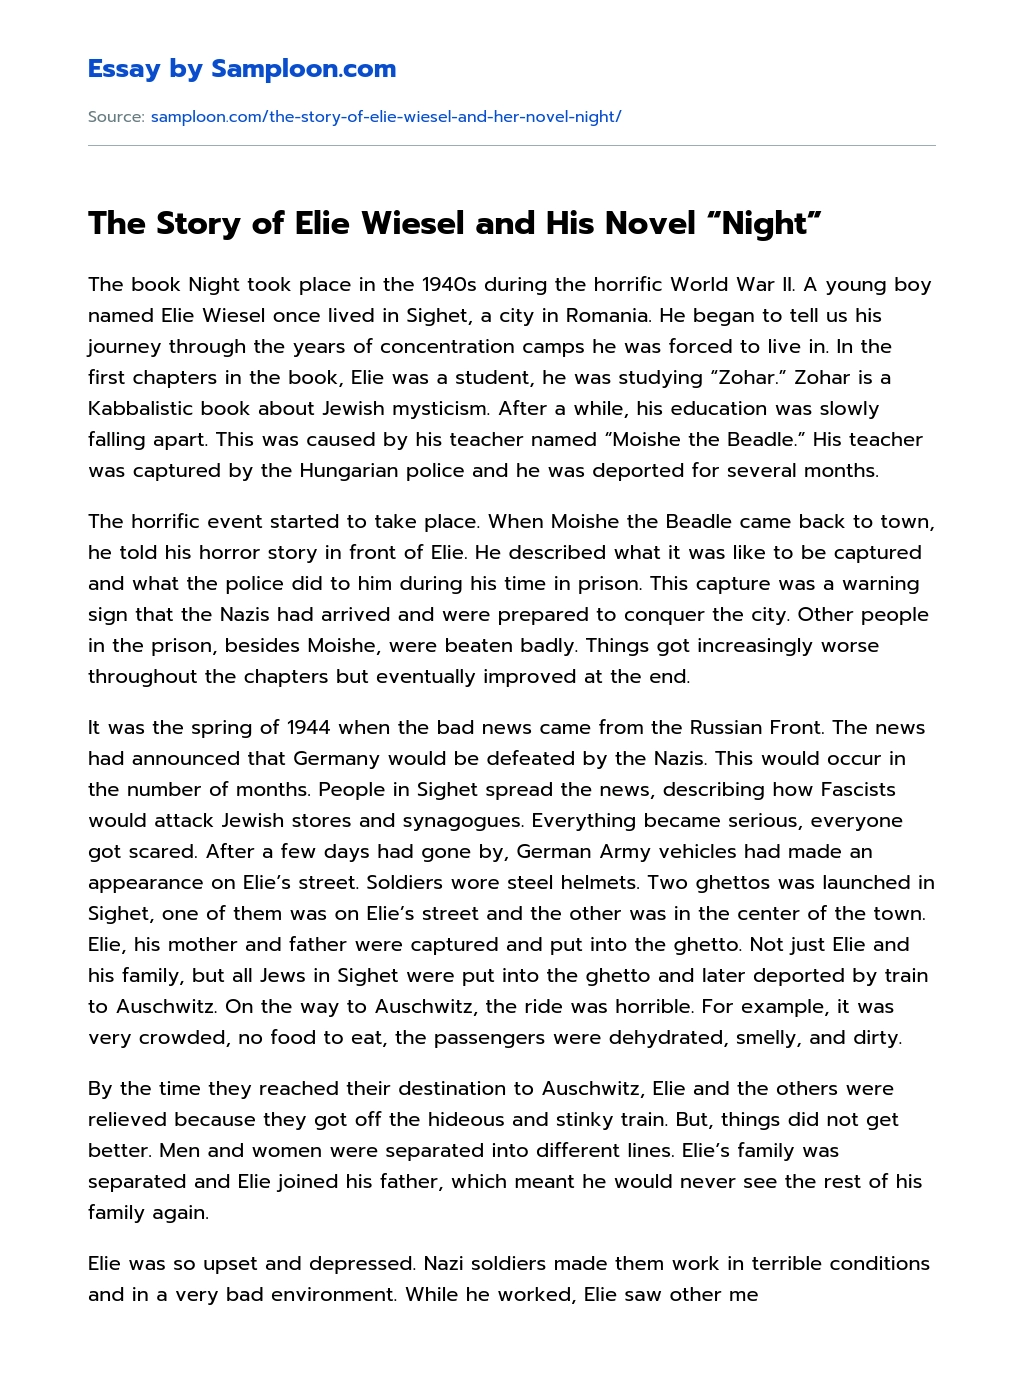 The Story of Elie Wiesel and His Novel “Night” essay